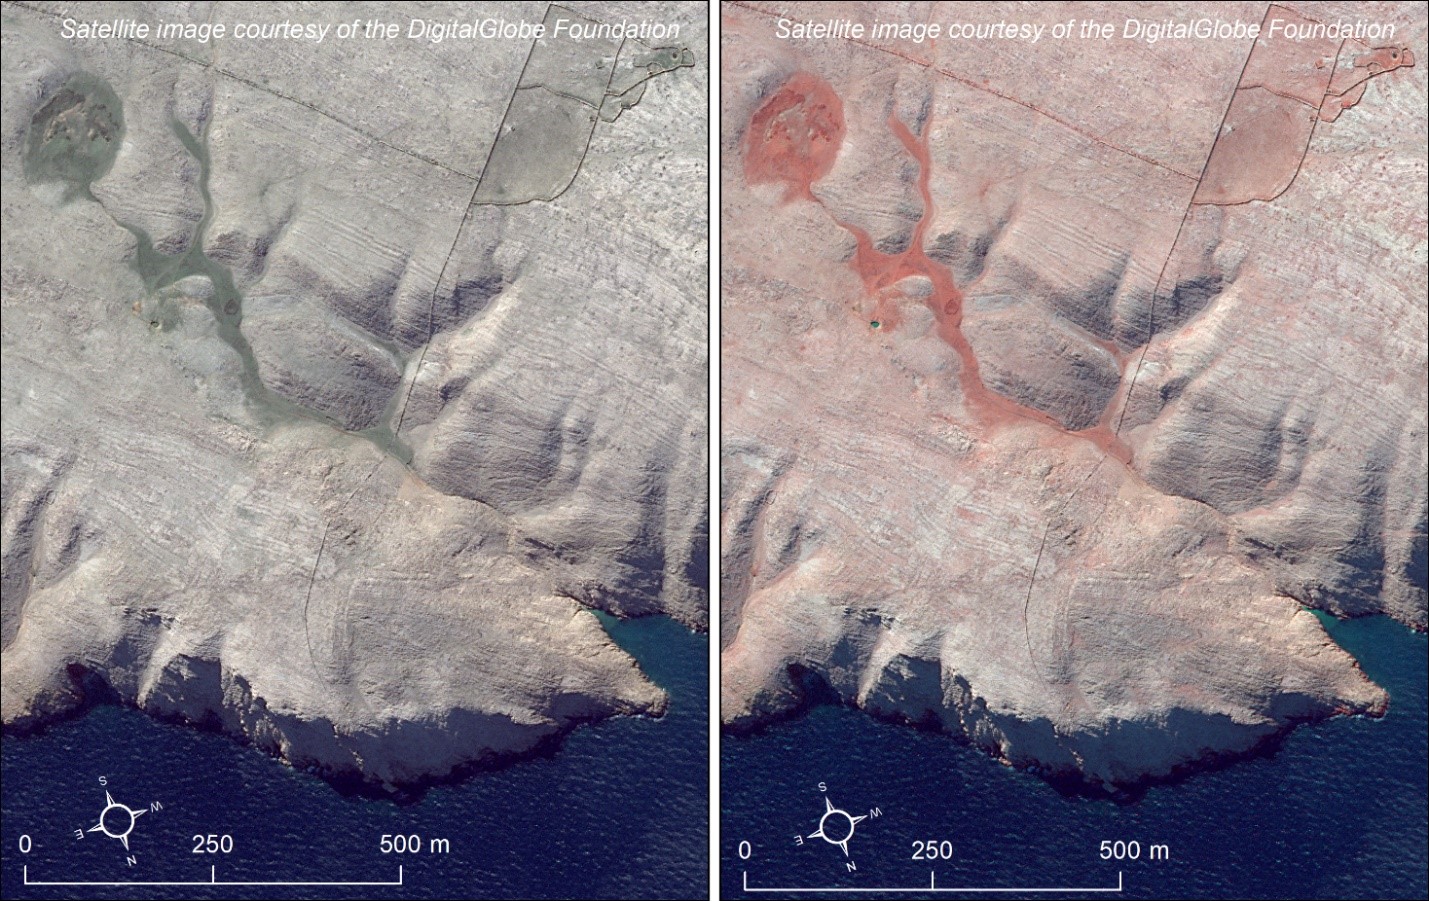 Satellite Image Comparison of an Active Gully on Pag Island